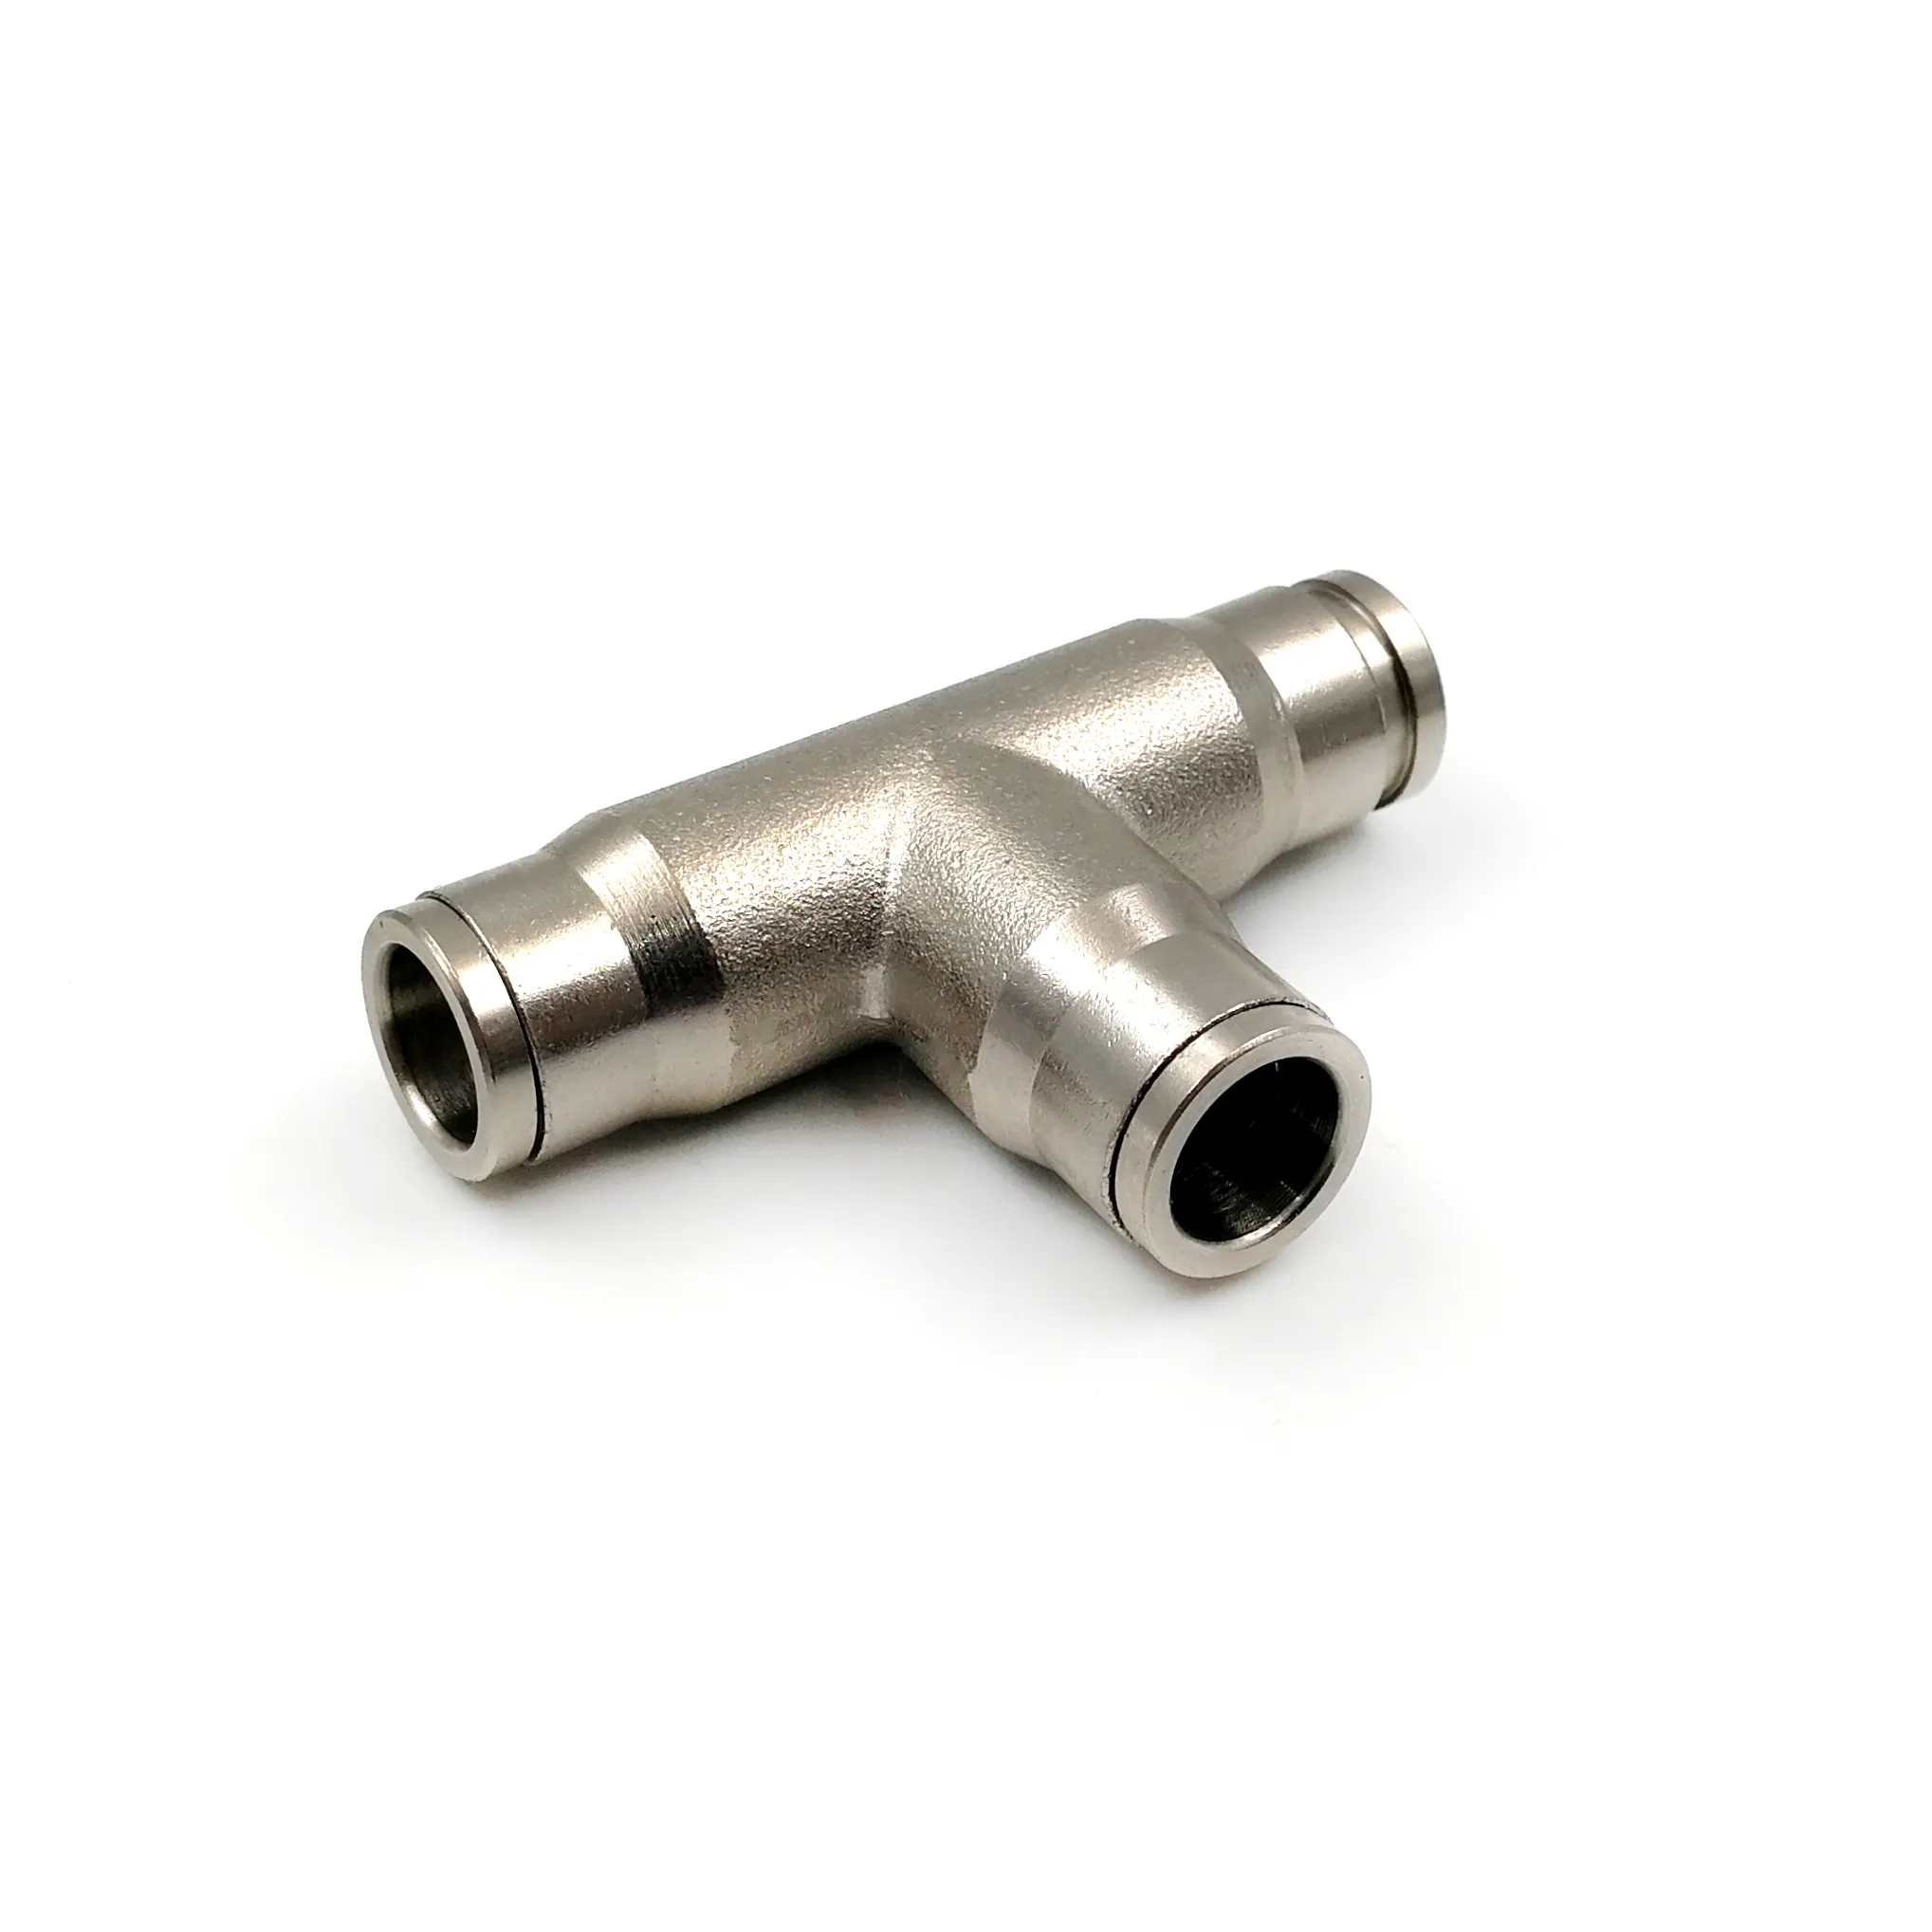 1 YS Hot Sale High Pressure Tee Connector, 12.7mm Compression Tube Fittings, Three-way Hose Connector Quick Coupling Slip lock